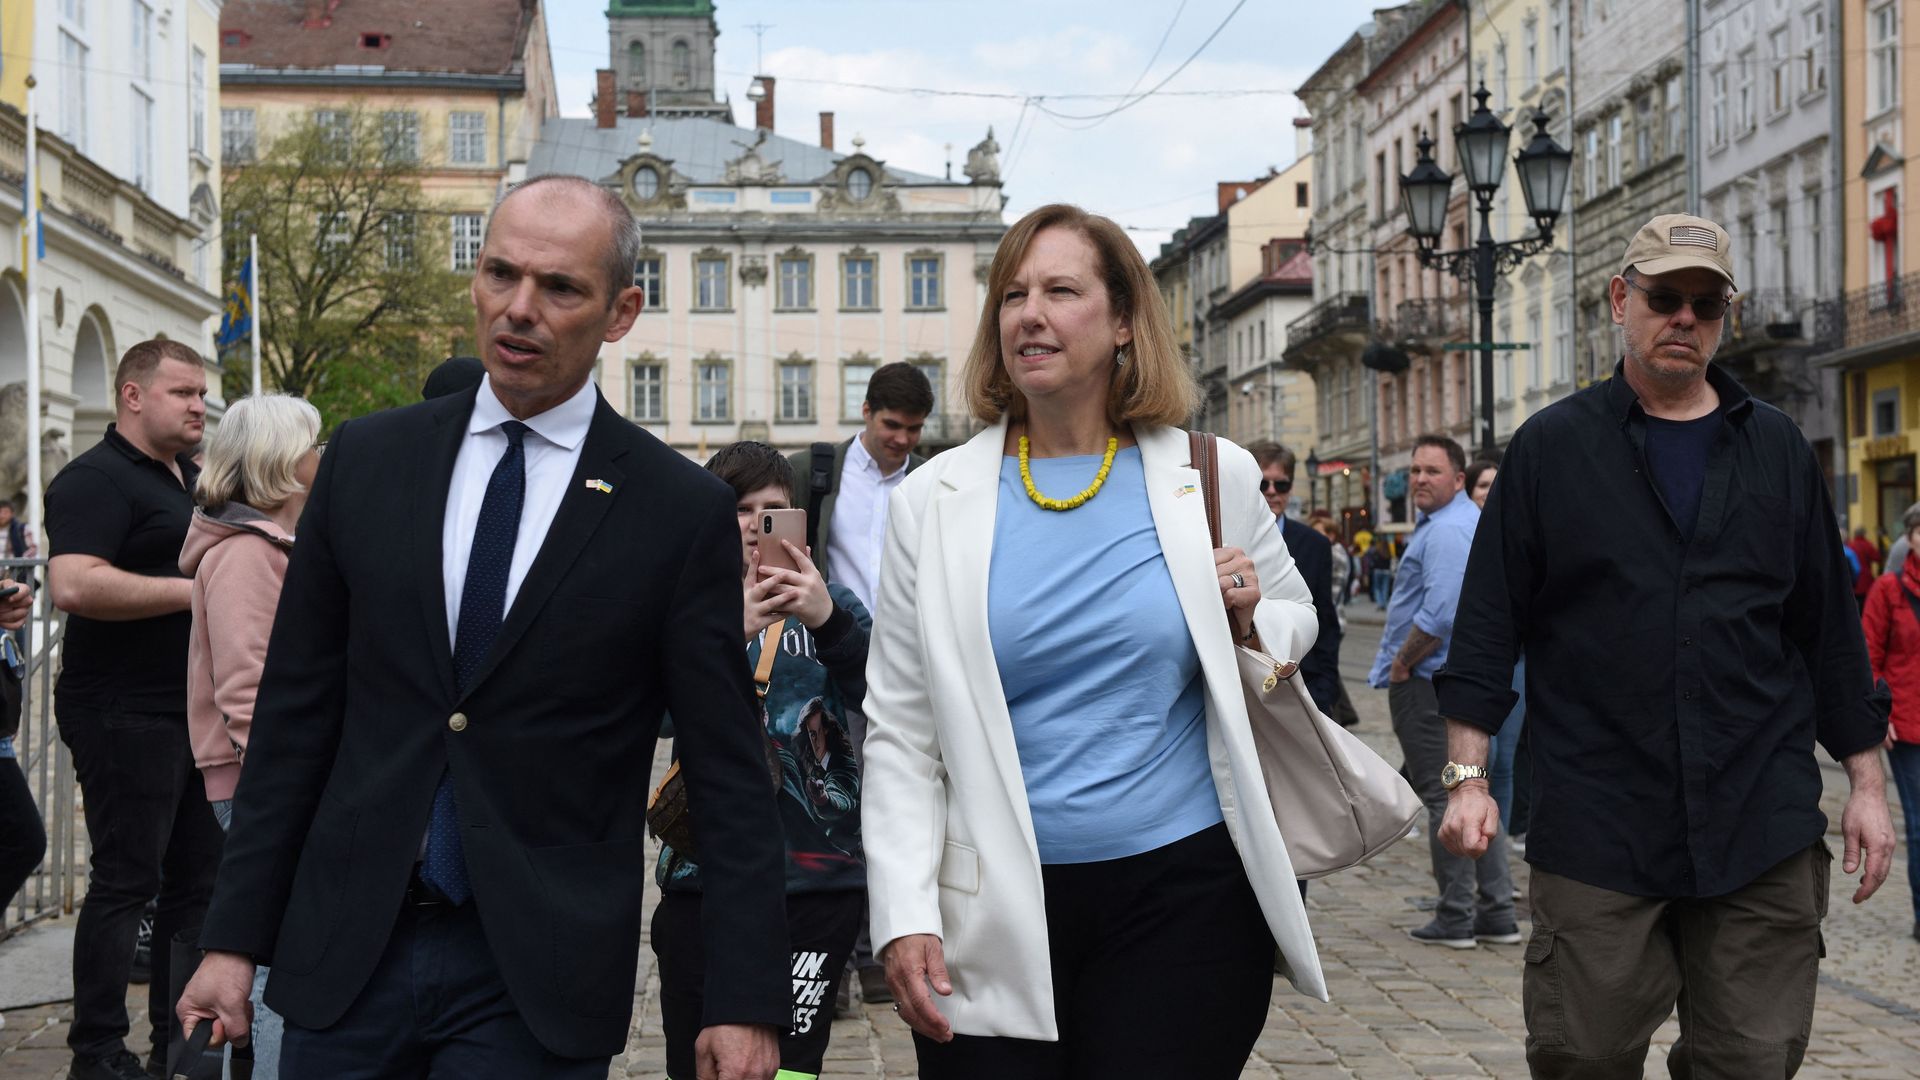 The U.S. charge d'affaires for Ukraine is seen walking the streets of Lviv during a visit.